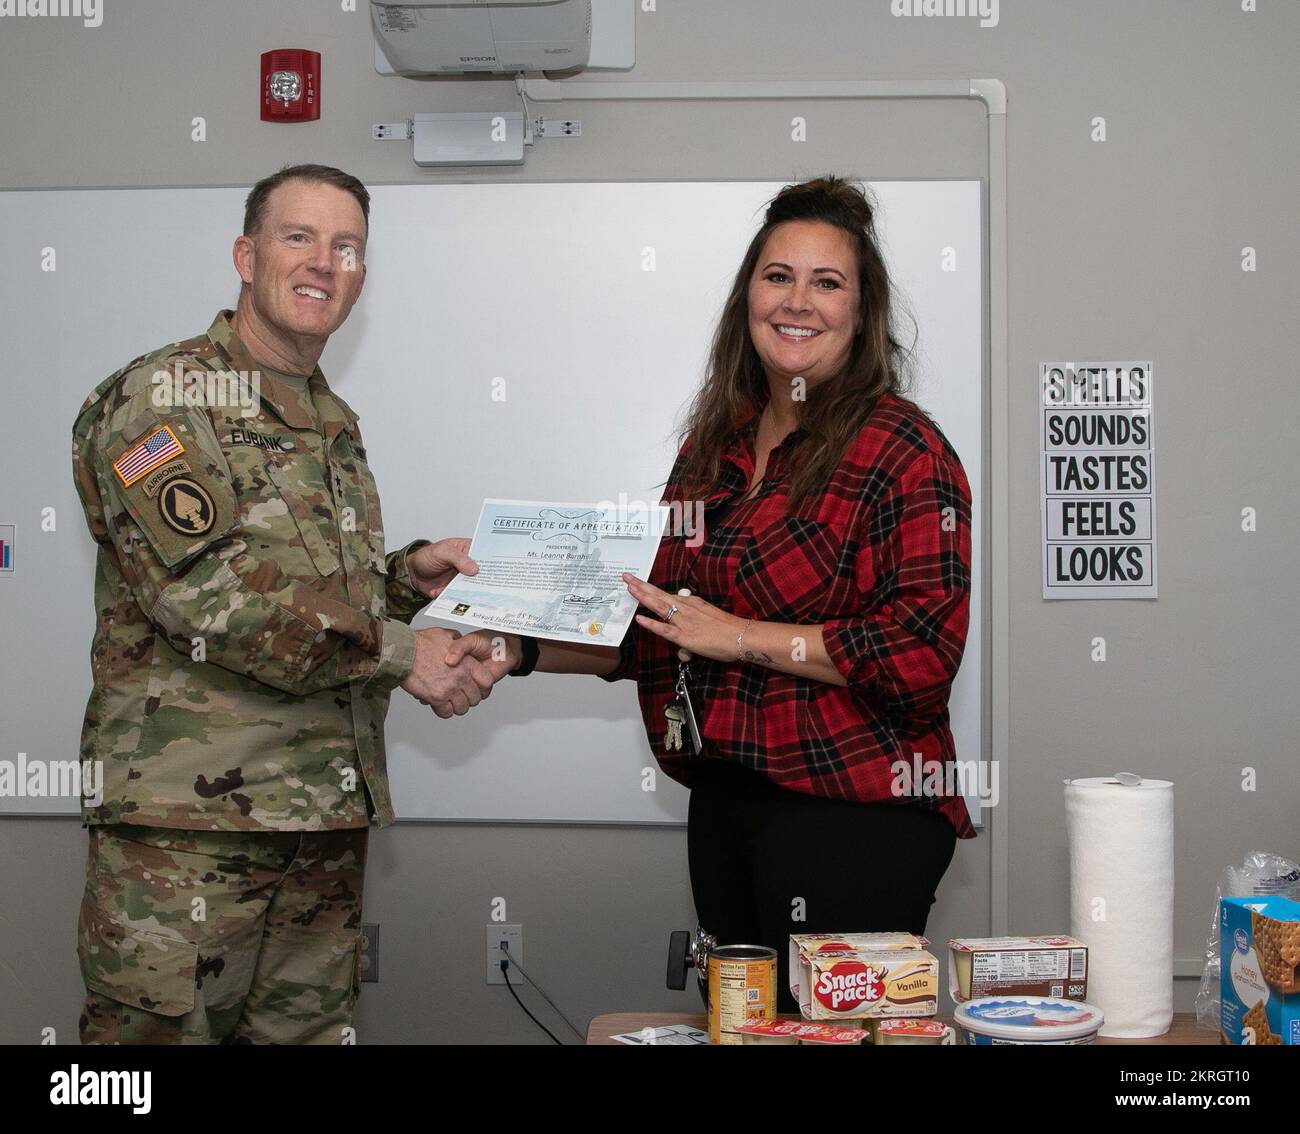 Network Enterprise Technology Command (NETCOM) Commanding General, Maj. Gen. Christopher L. Eubank, presents Colonel Johnston Elementary teacher, Leanne Barnhill, with a certificate of achievement Nov. 16. The awards were presented to give thanks to the school faculty for their recent Veterans Day event. Stock Photo